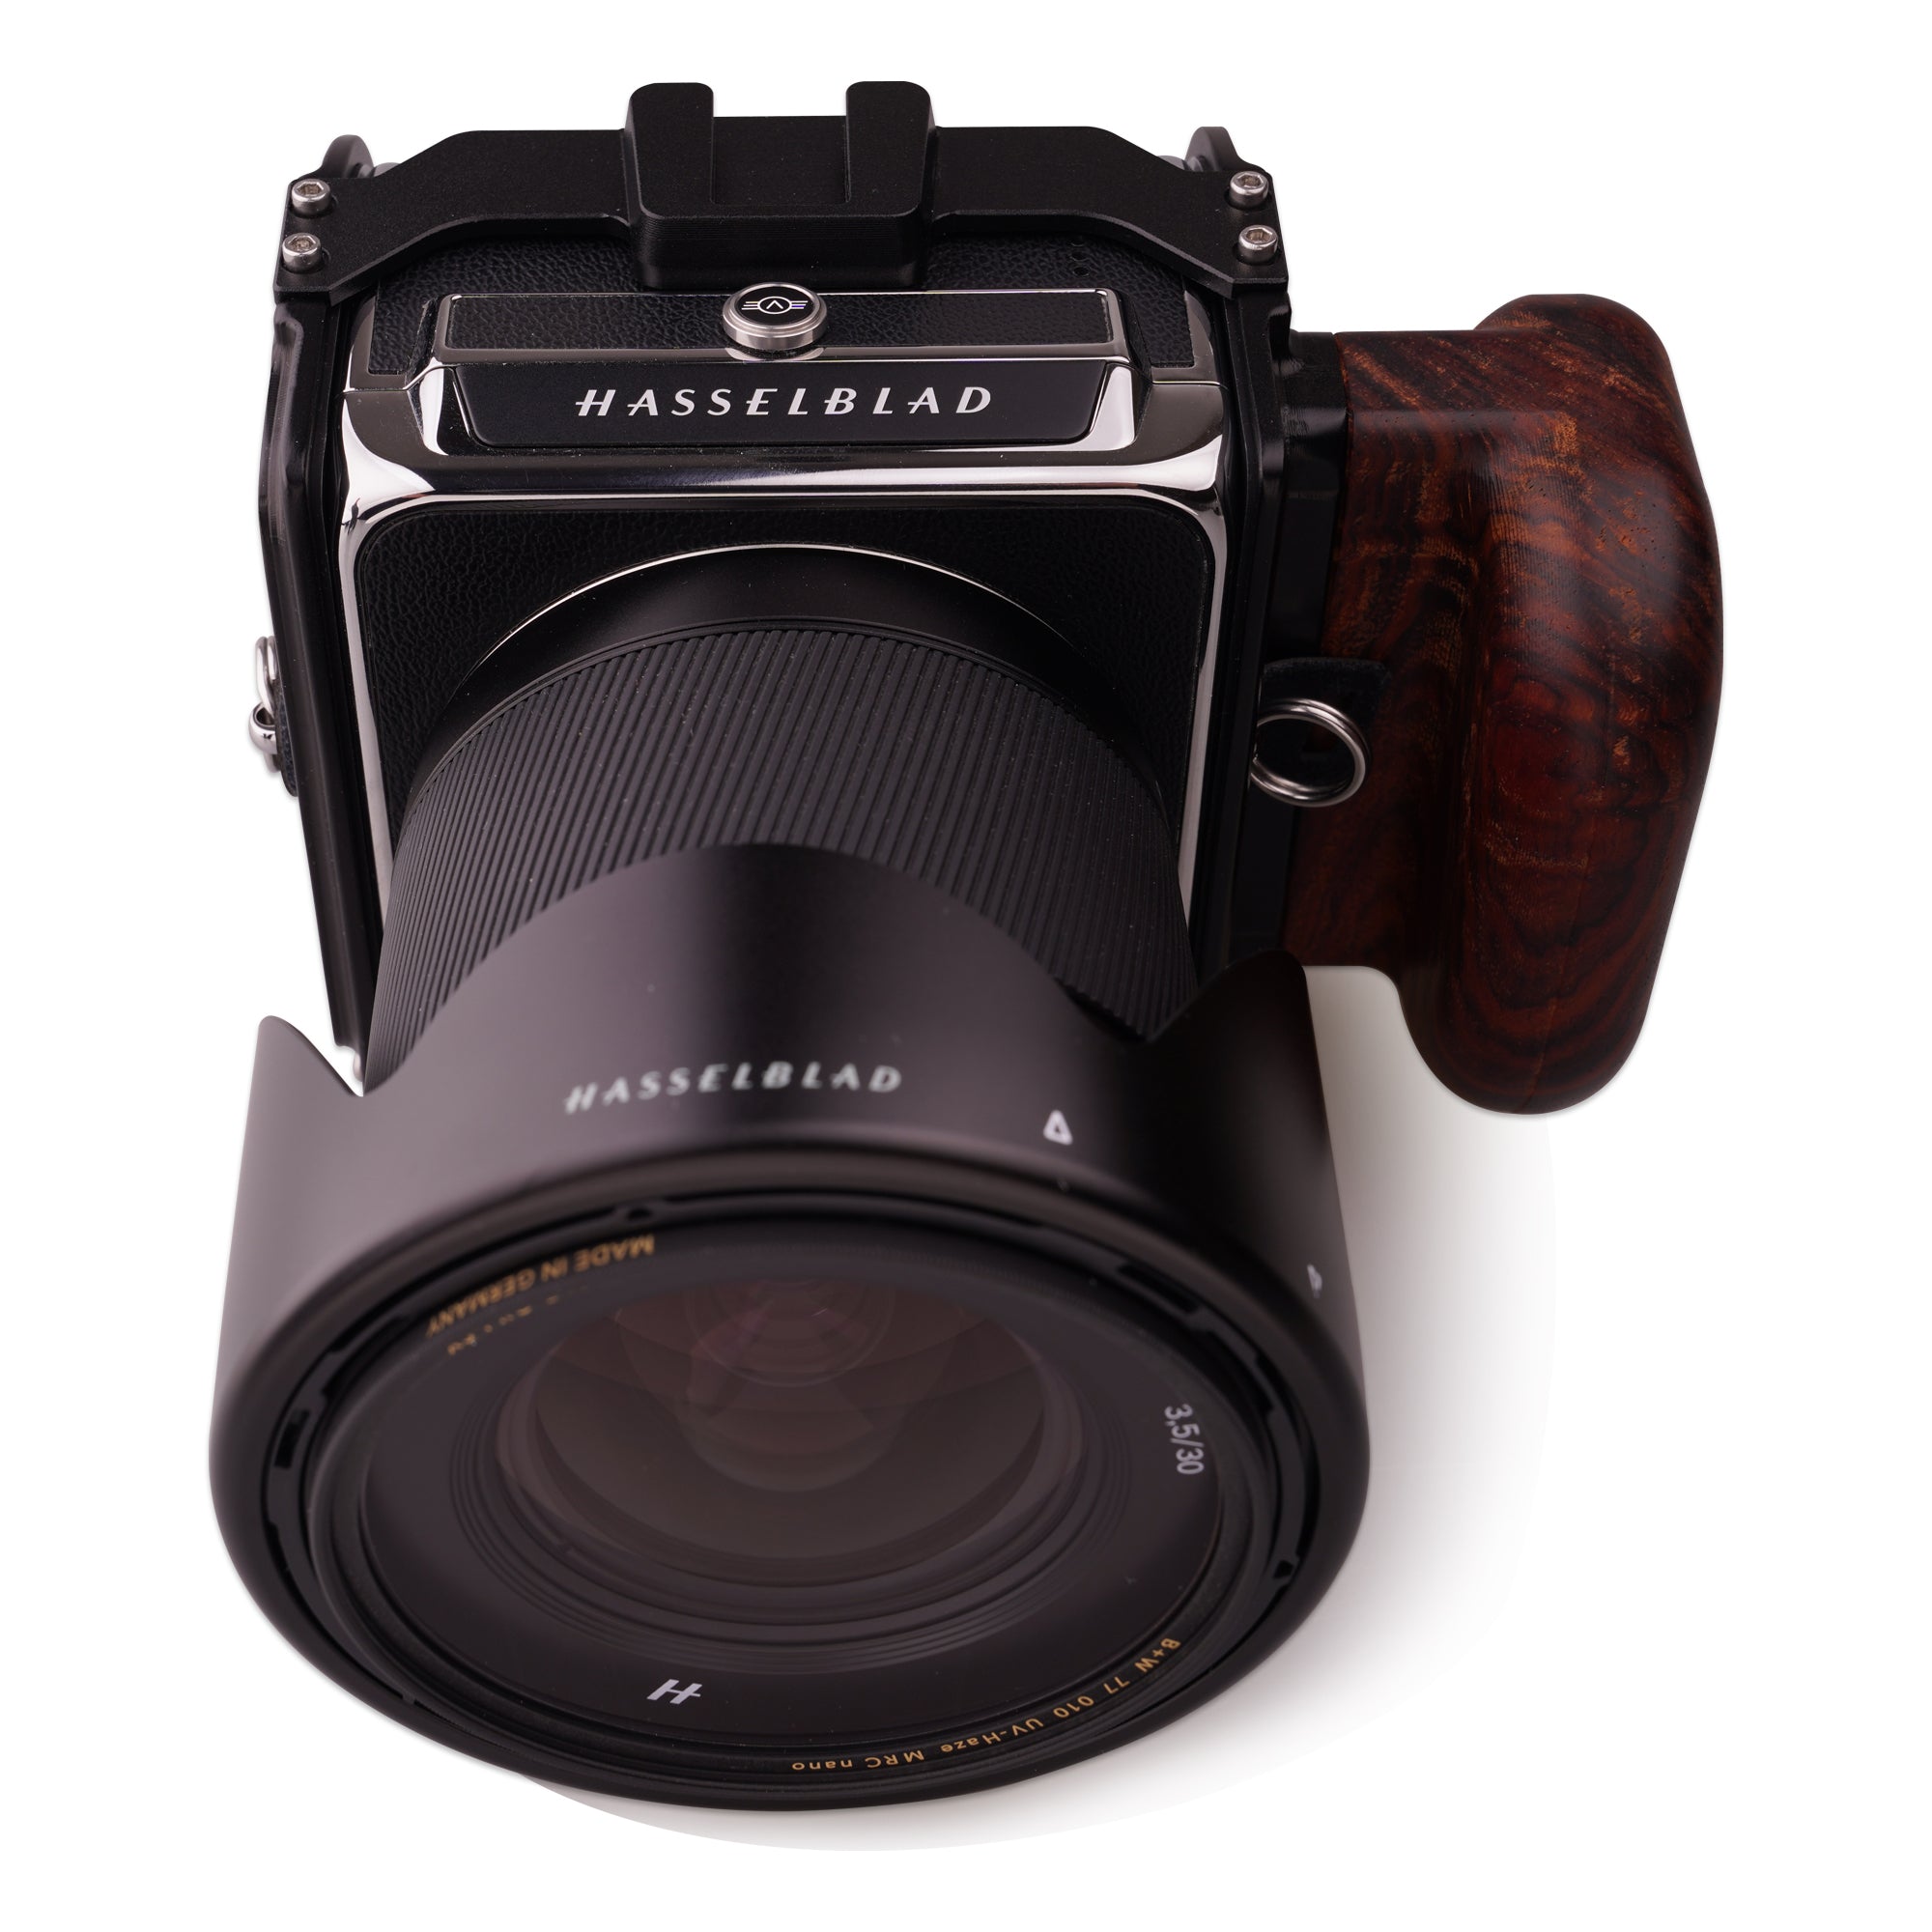 Lanhorse Camera Cage for Hasselblad 907x with Rosewood Handgrip. 2nd G